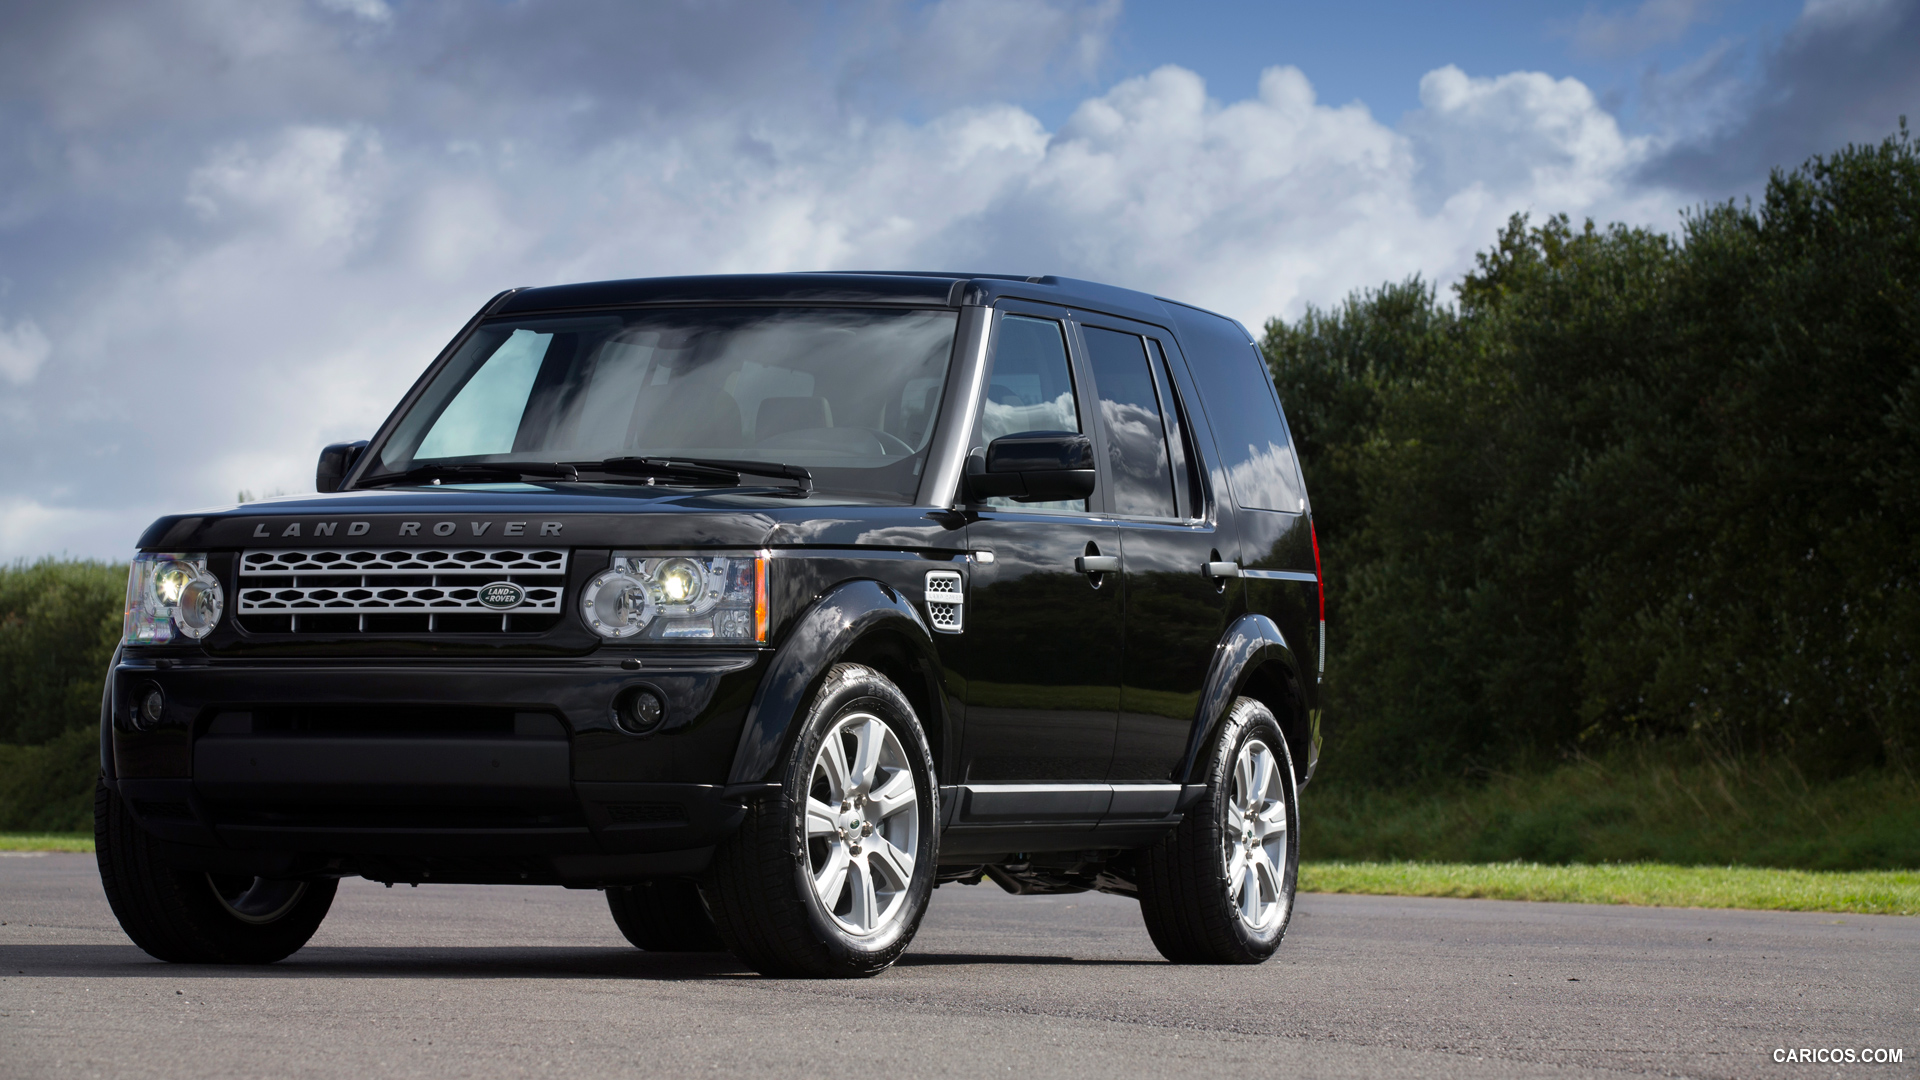 2013 Land Rover Discovery 4 Mariana Black - Front | HD Wallpaper #2